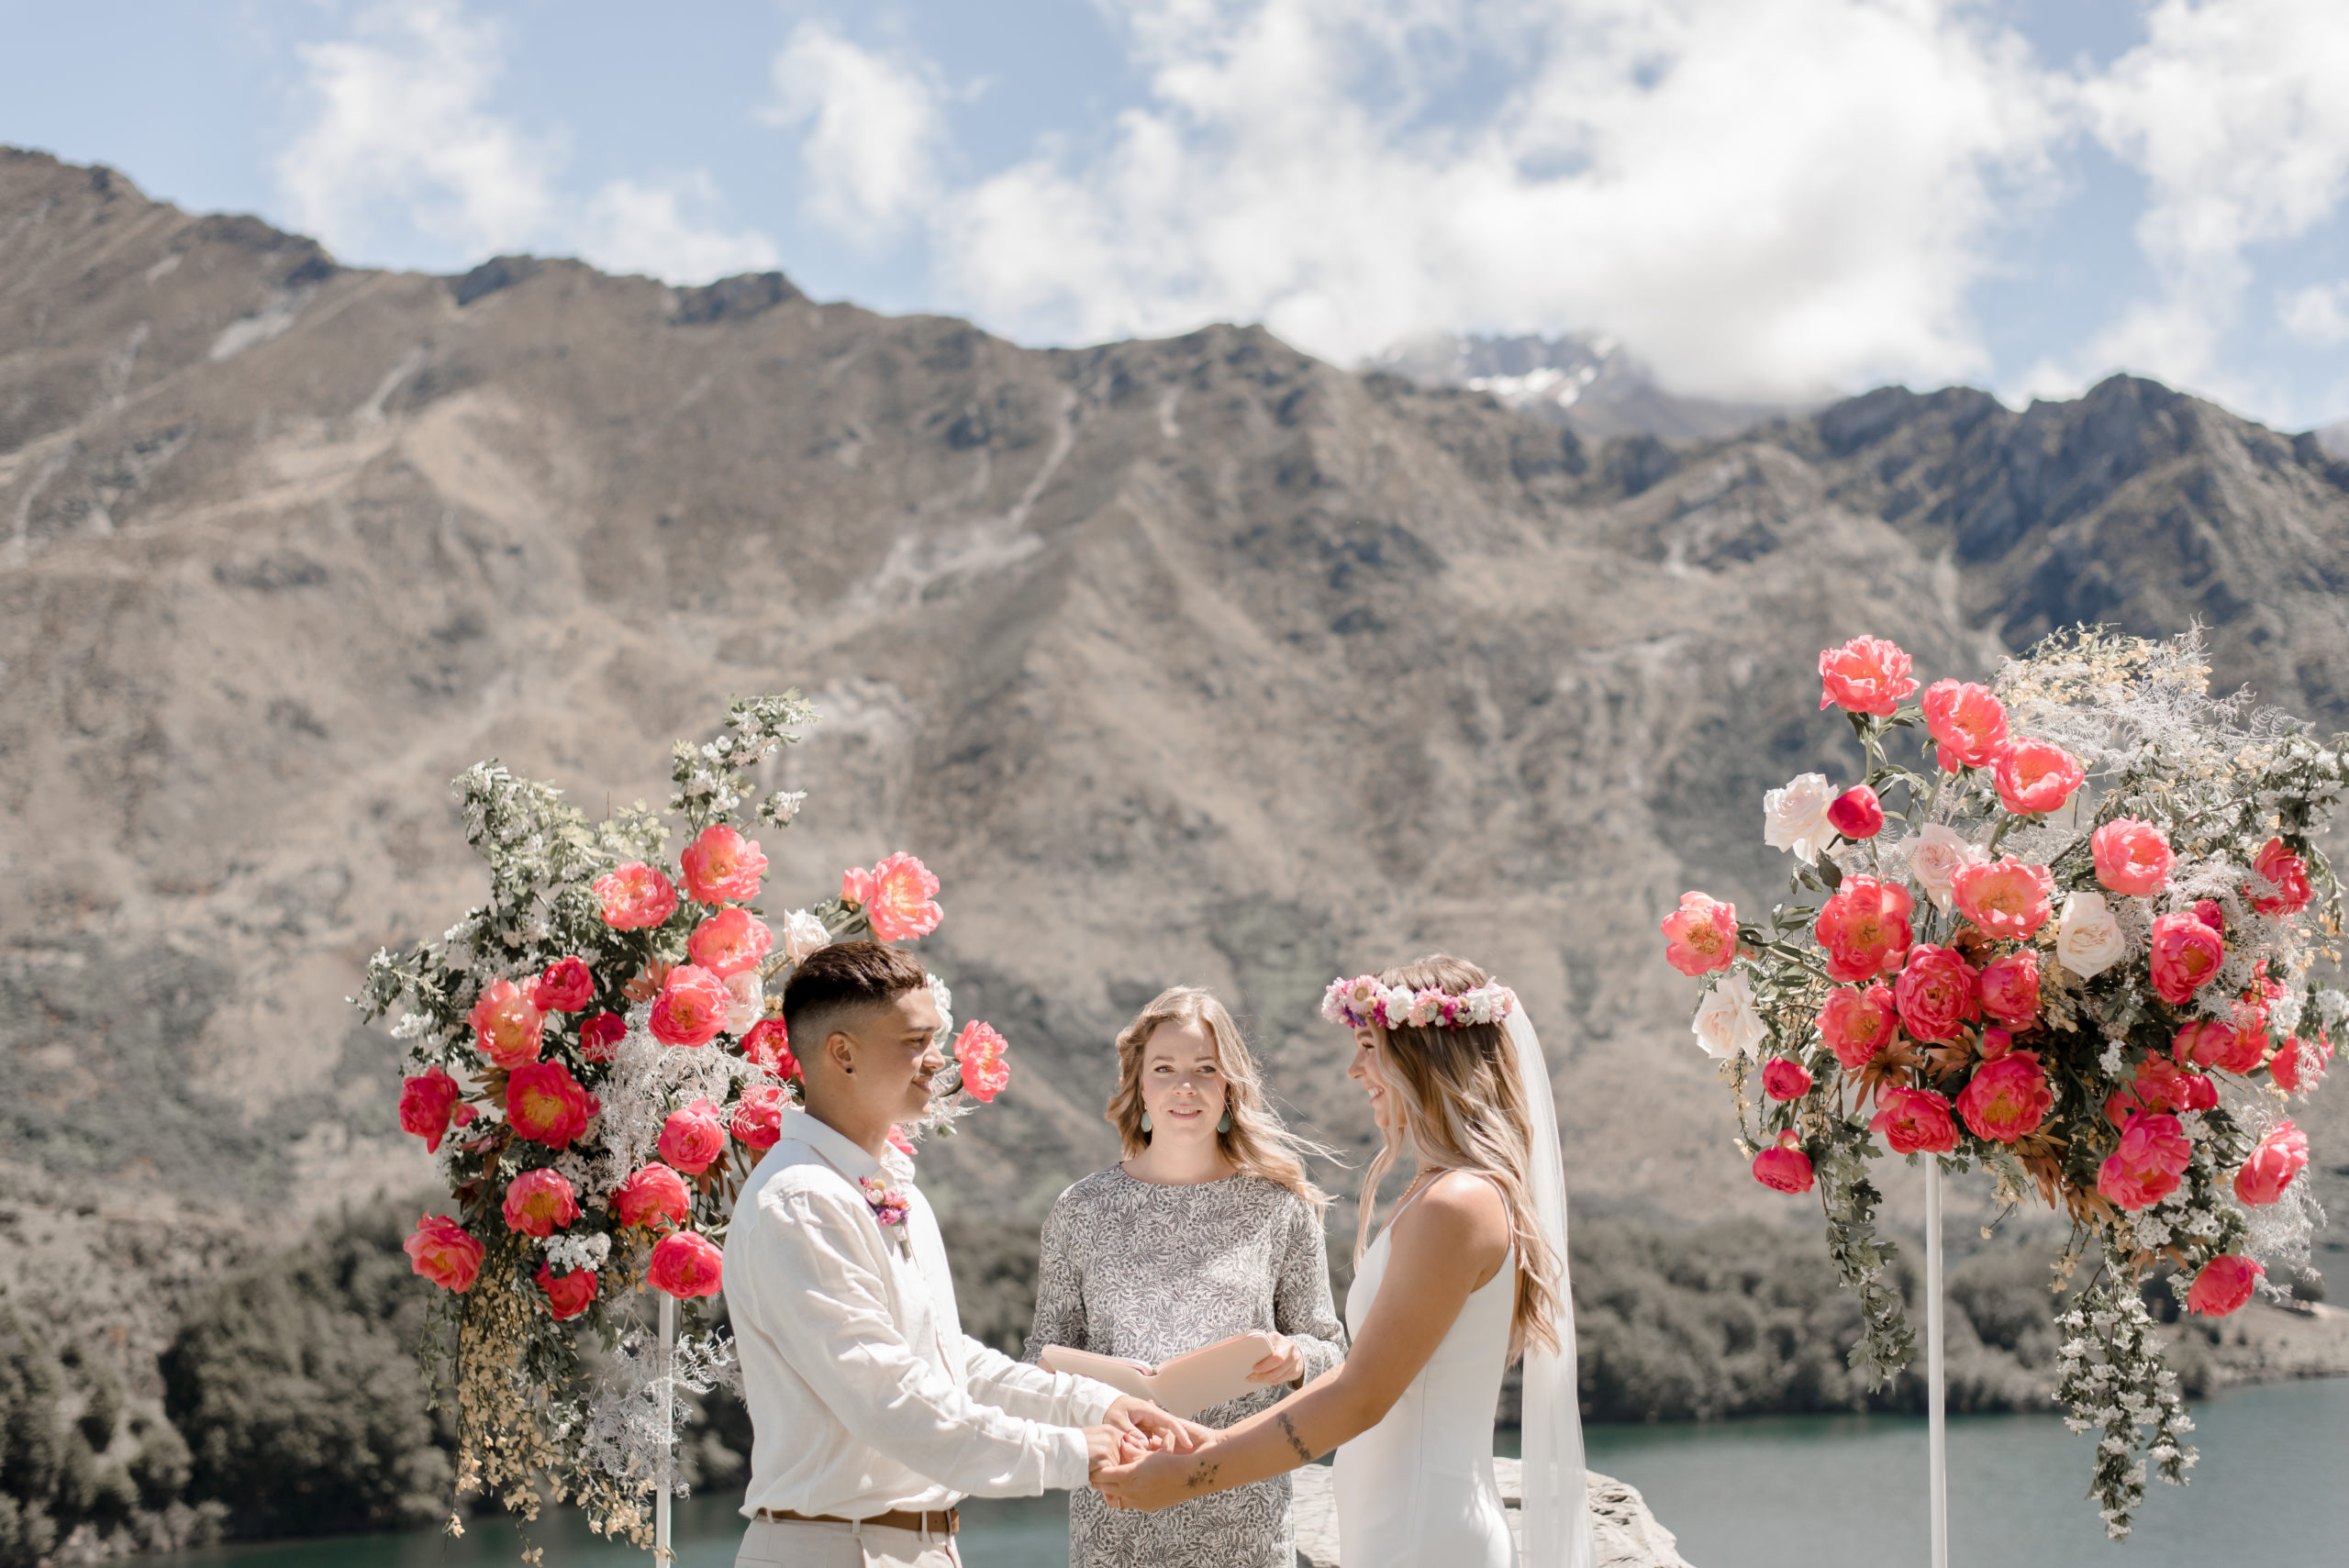 queenstown wedding celebrant for Your Big Day Emily during wedding ceremony at Moke Lake